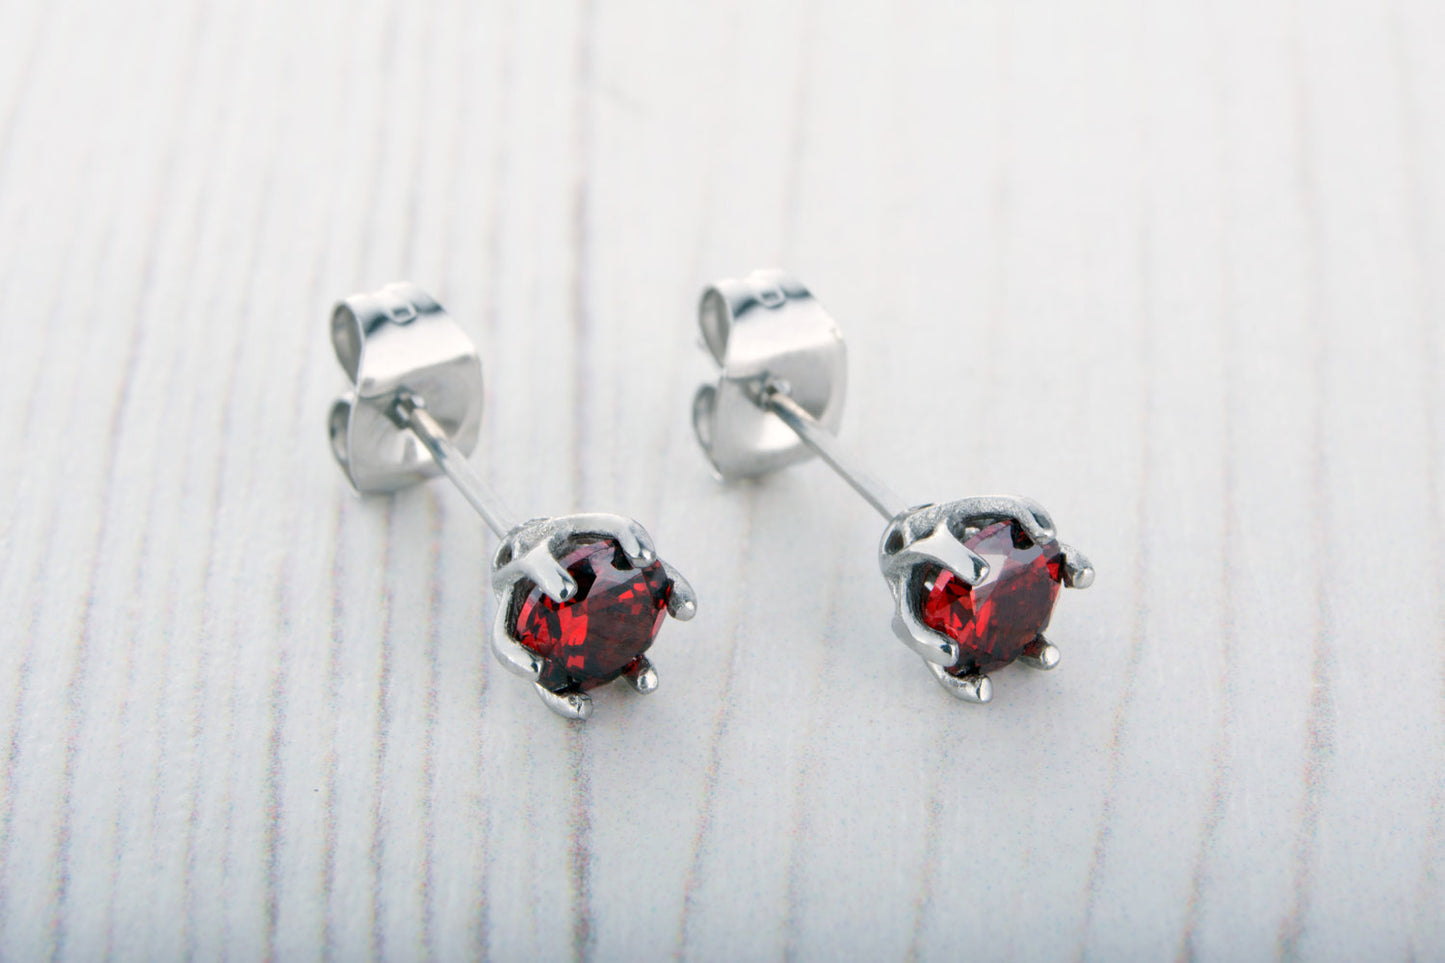 Natural Garnet stud earrings, available in titanium, white gold and surgical steel 4mm & 5mm sizes